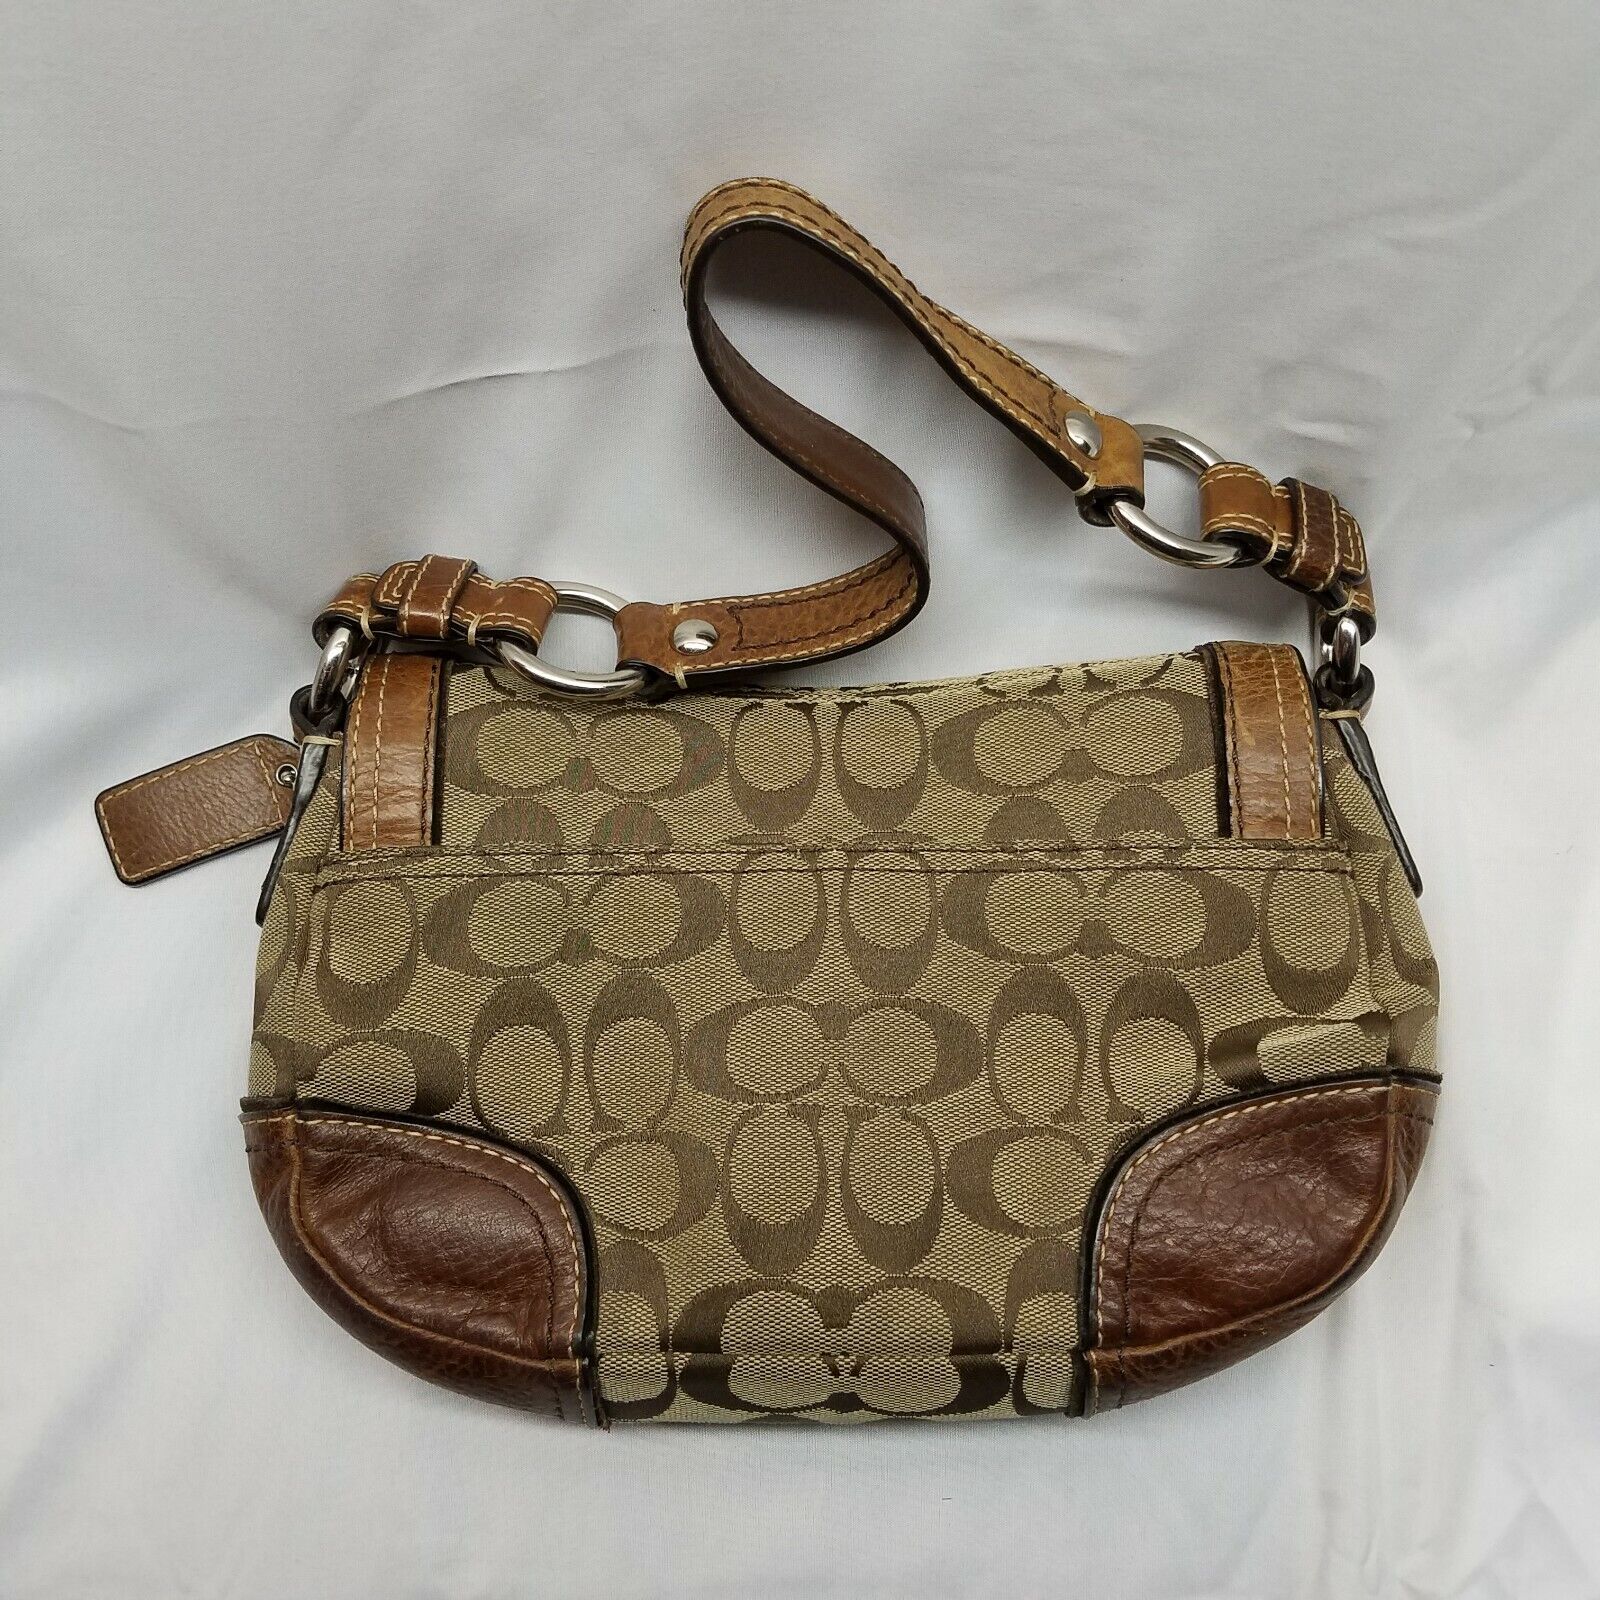 Coach DO794-10983 Purse, Brown, Cloth and Leather